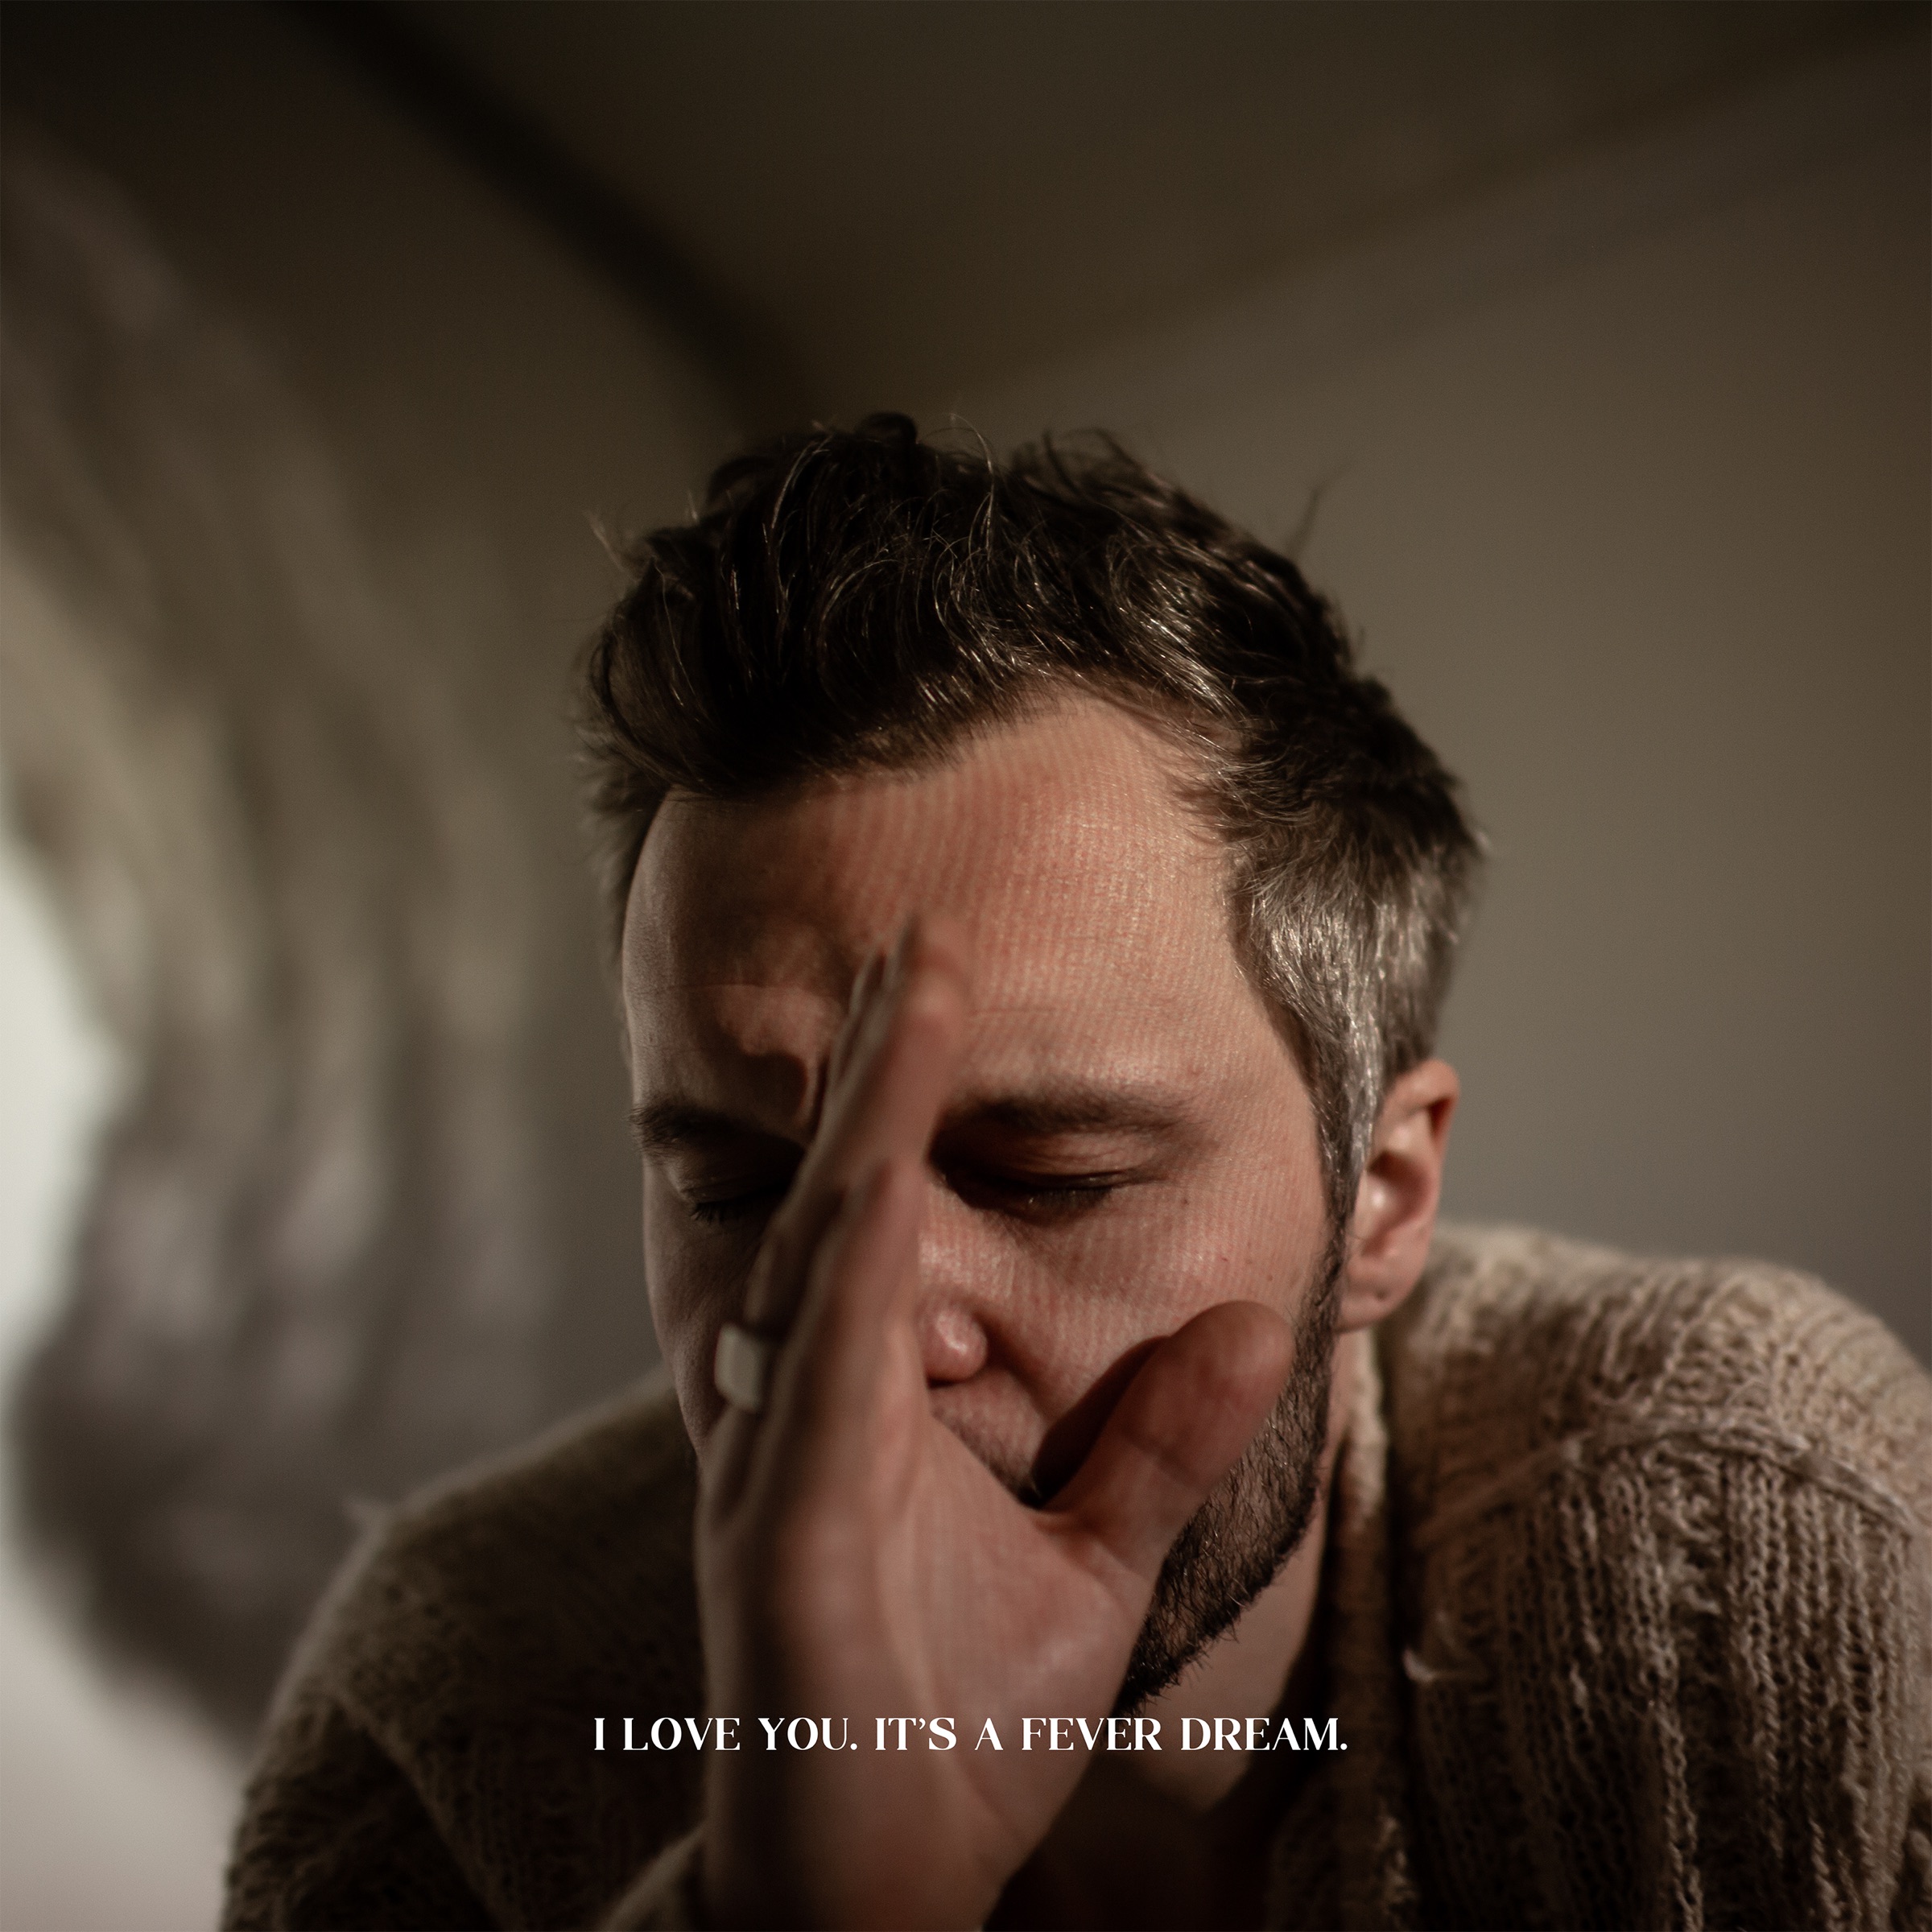 Album Art for "I Love You. It's a Fever Dream." by The Tallest Man on Earth